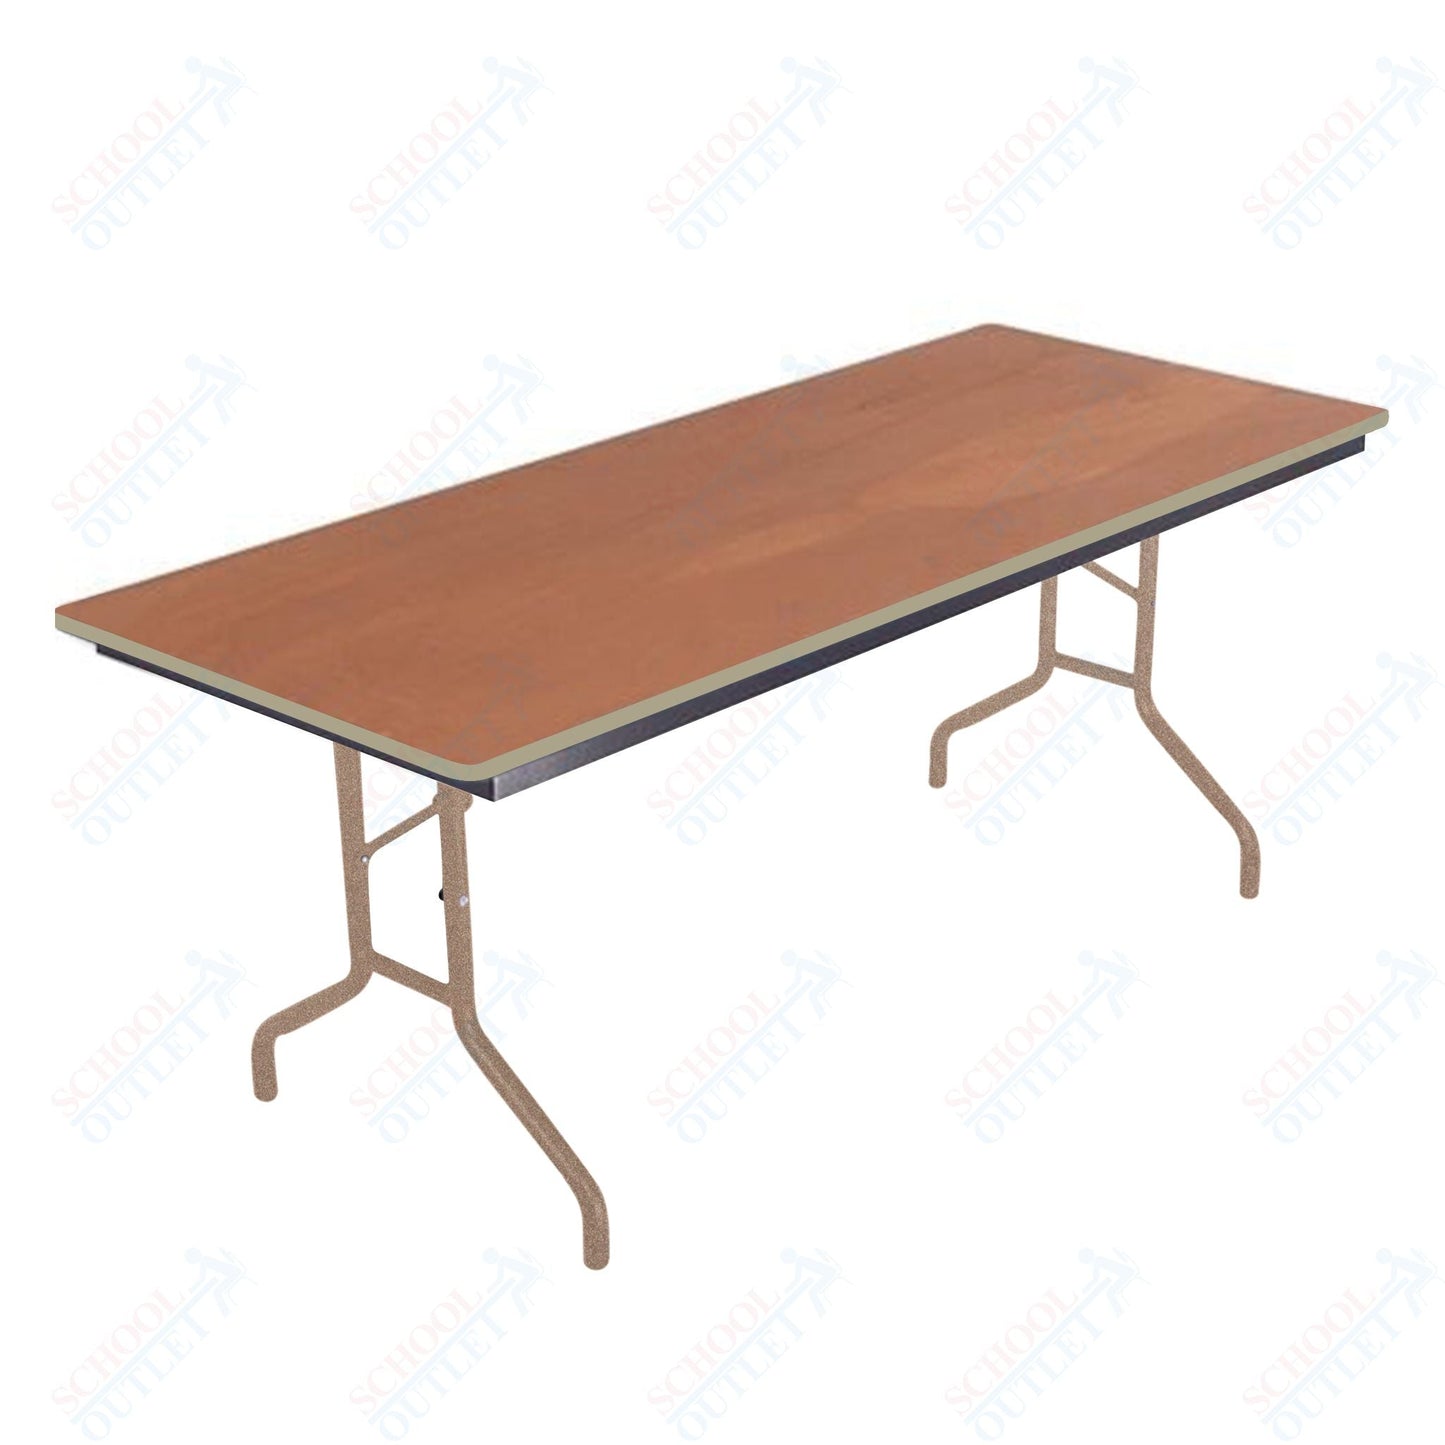 AmTab Folding Table - Plywood Stained and Sealed - Vinyl T - Molding Edge - 36"W x 96"L x 29"H (AmTab AMT - 368PM) - SchoolOutlet